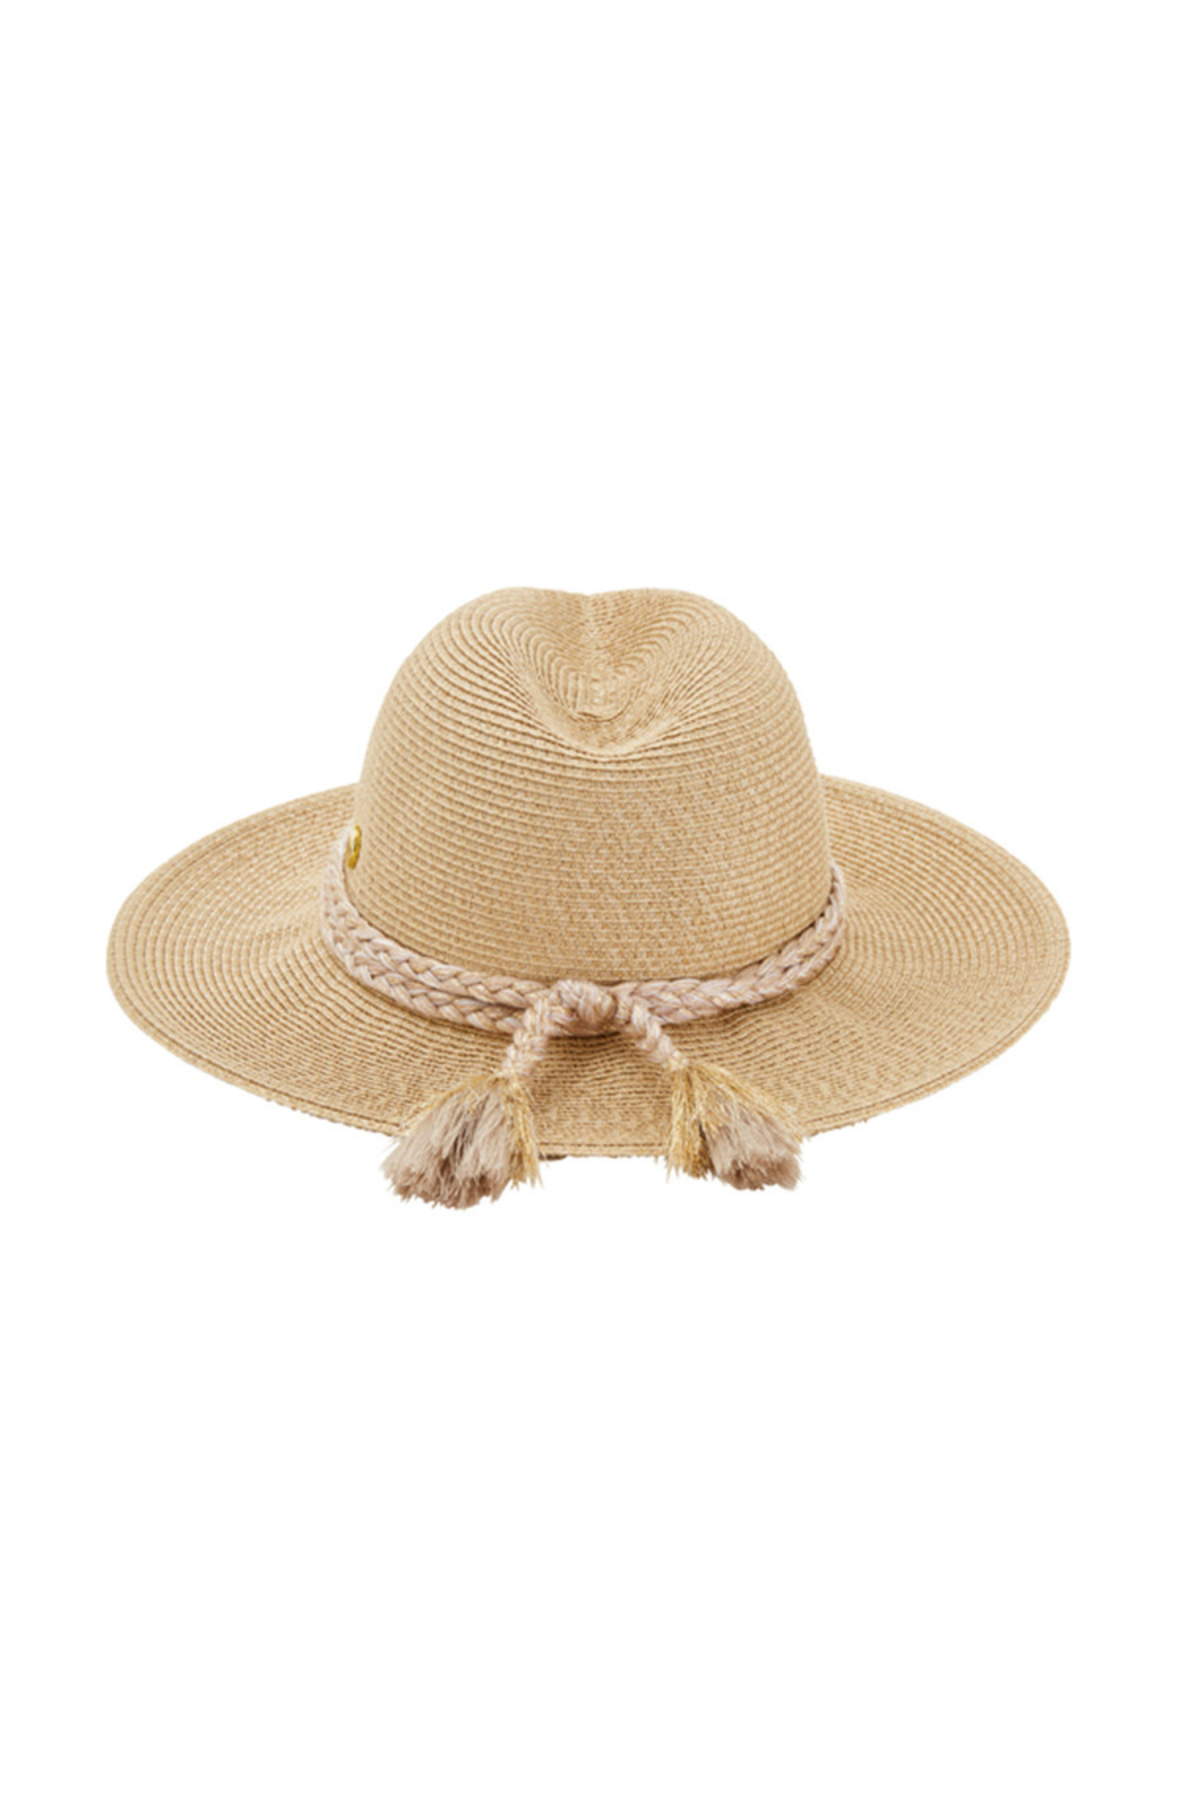 Seafolly Collapsable Fedora - Gold